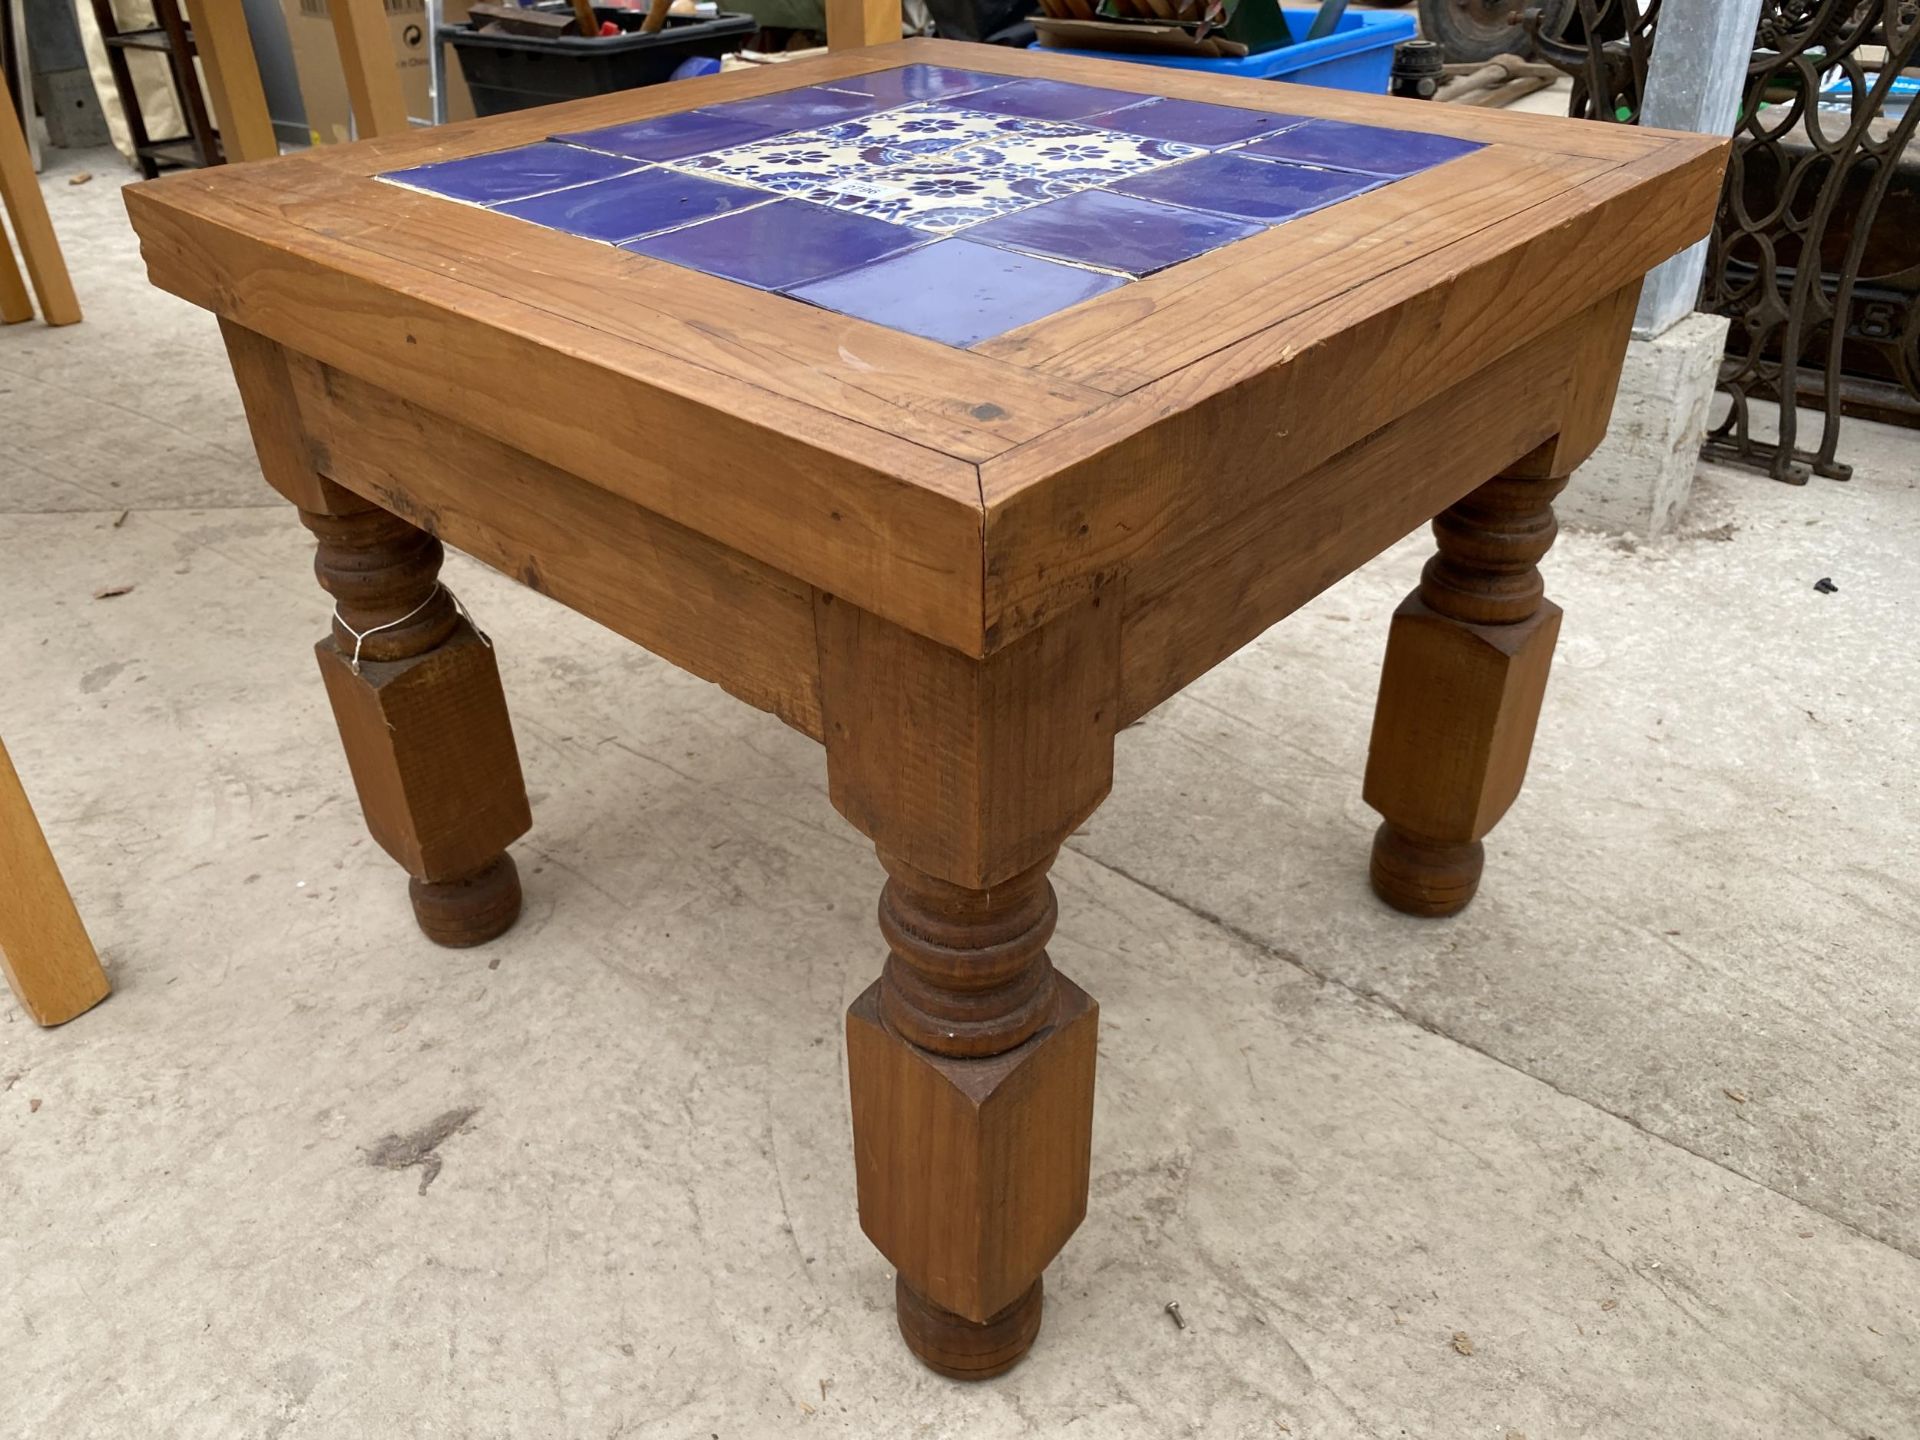 A MODERN PINE LAMP TABLE WITH INSET TILE TOP, 23.5" SQUARE - Image 2 of 3